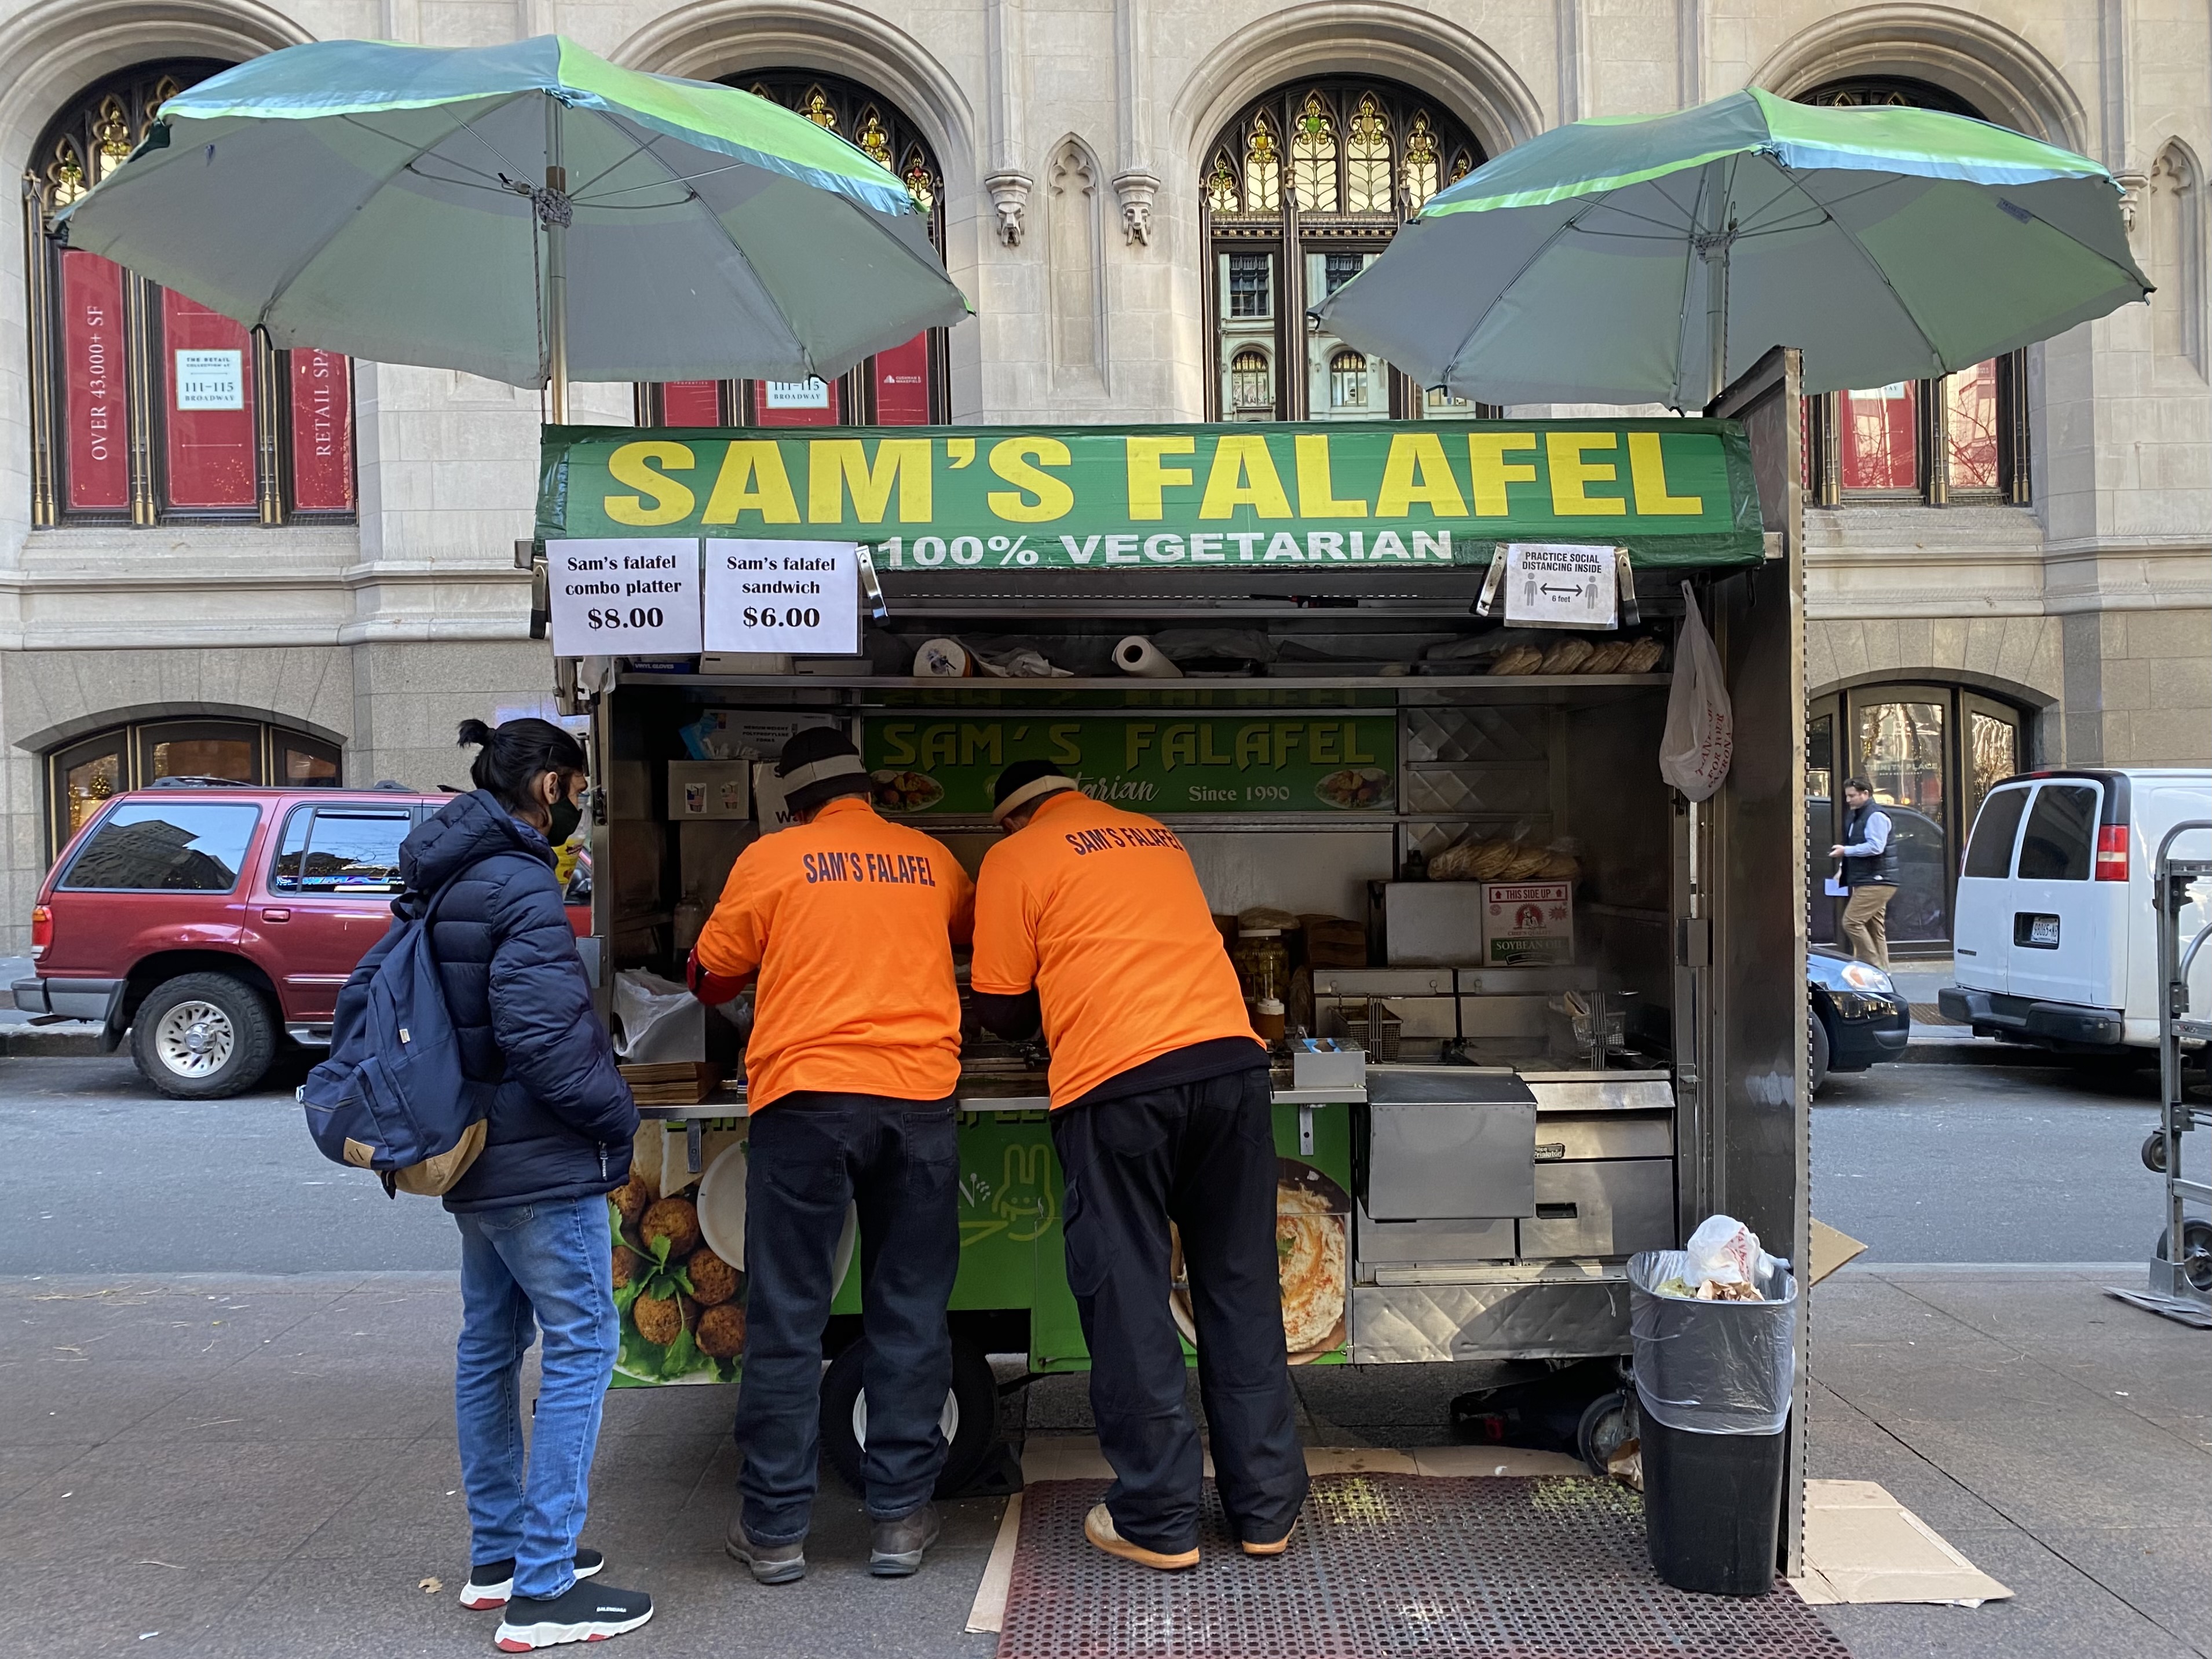 Two people wearing orange shirts with the words “Sam’s Falafel” in black lettering stand at an outdoor food cart.